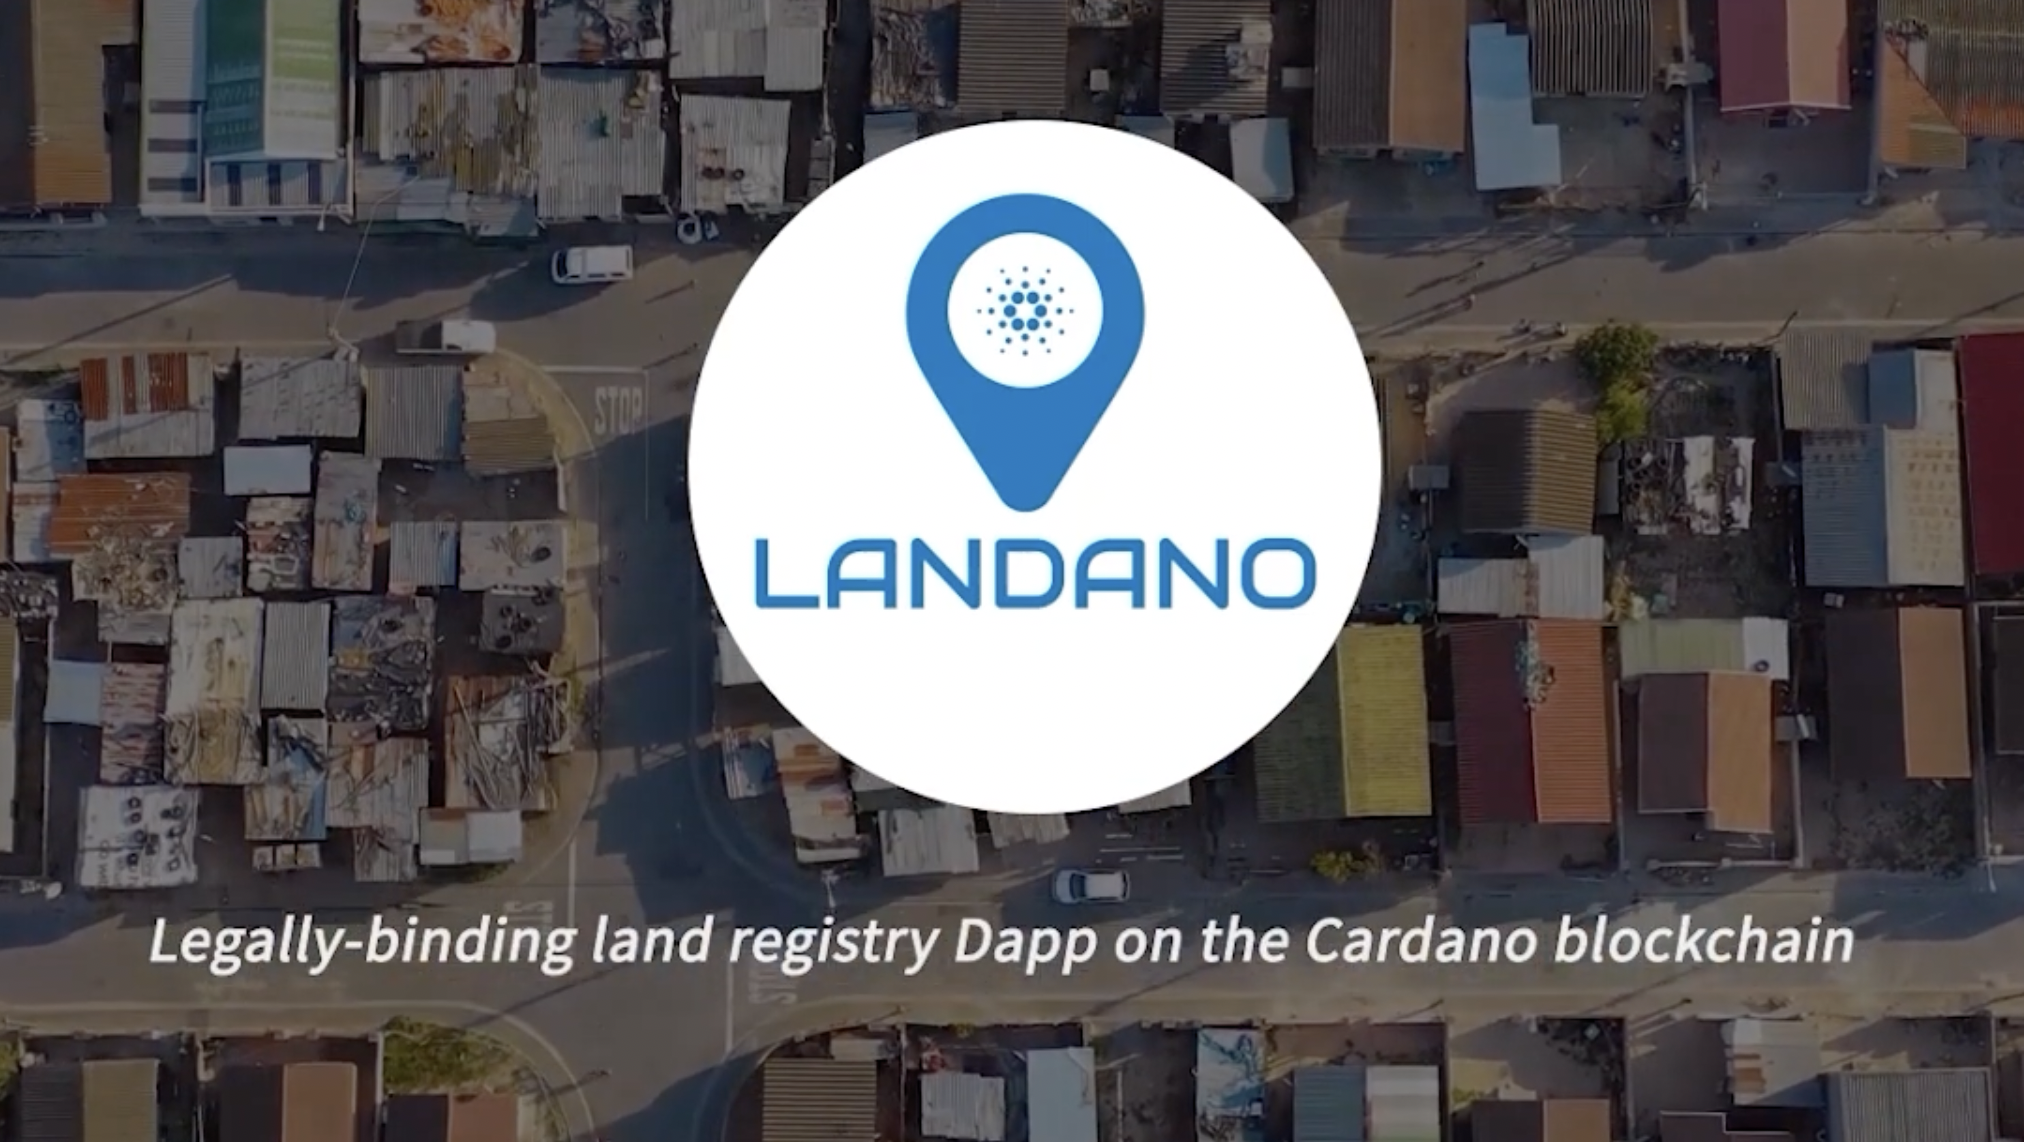 Introducing the Landano project